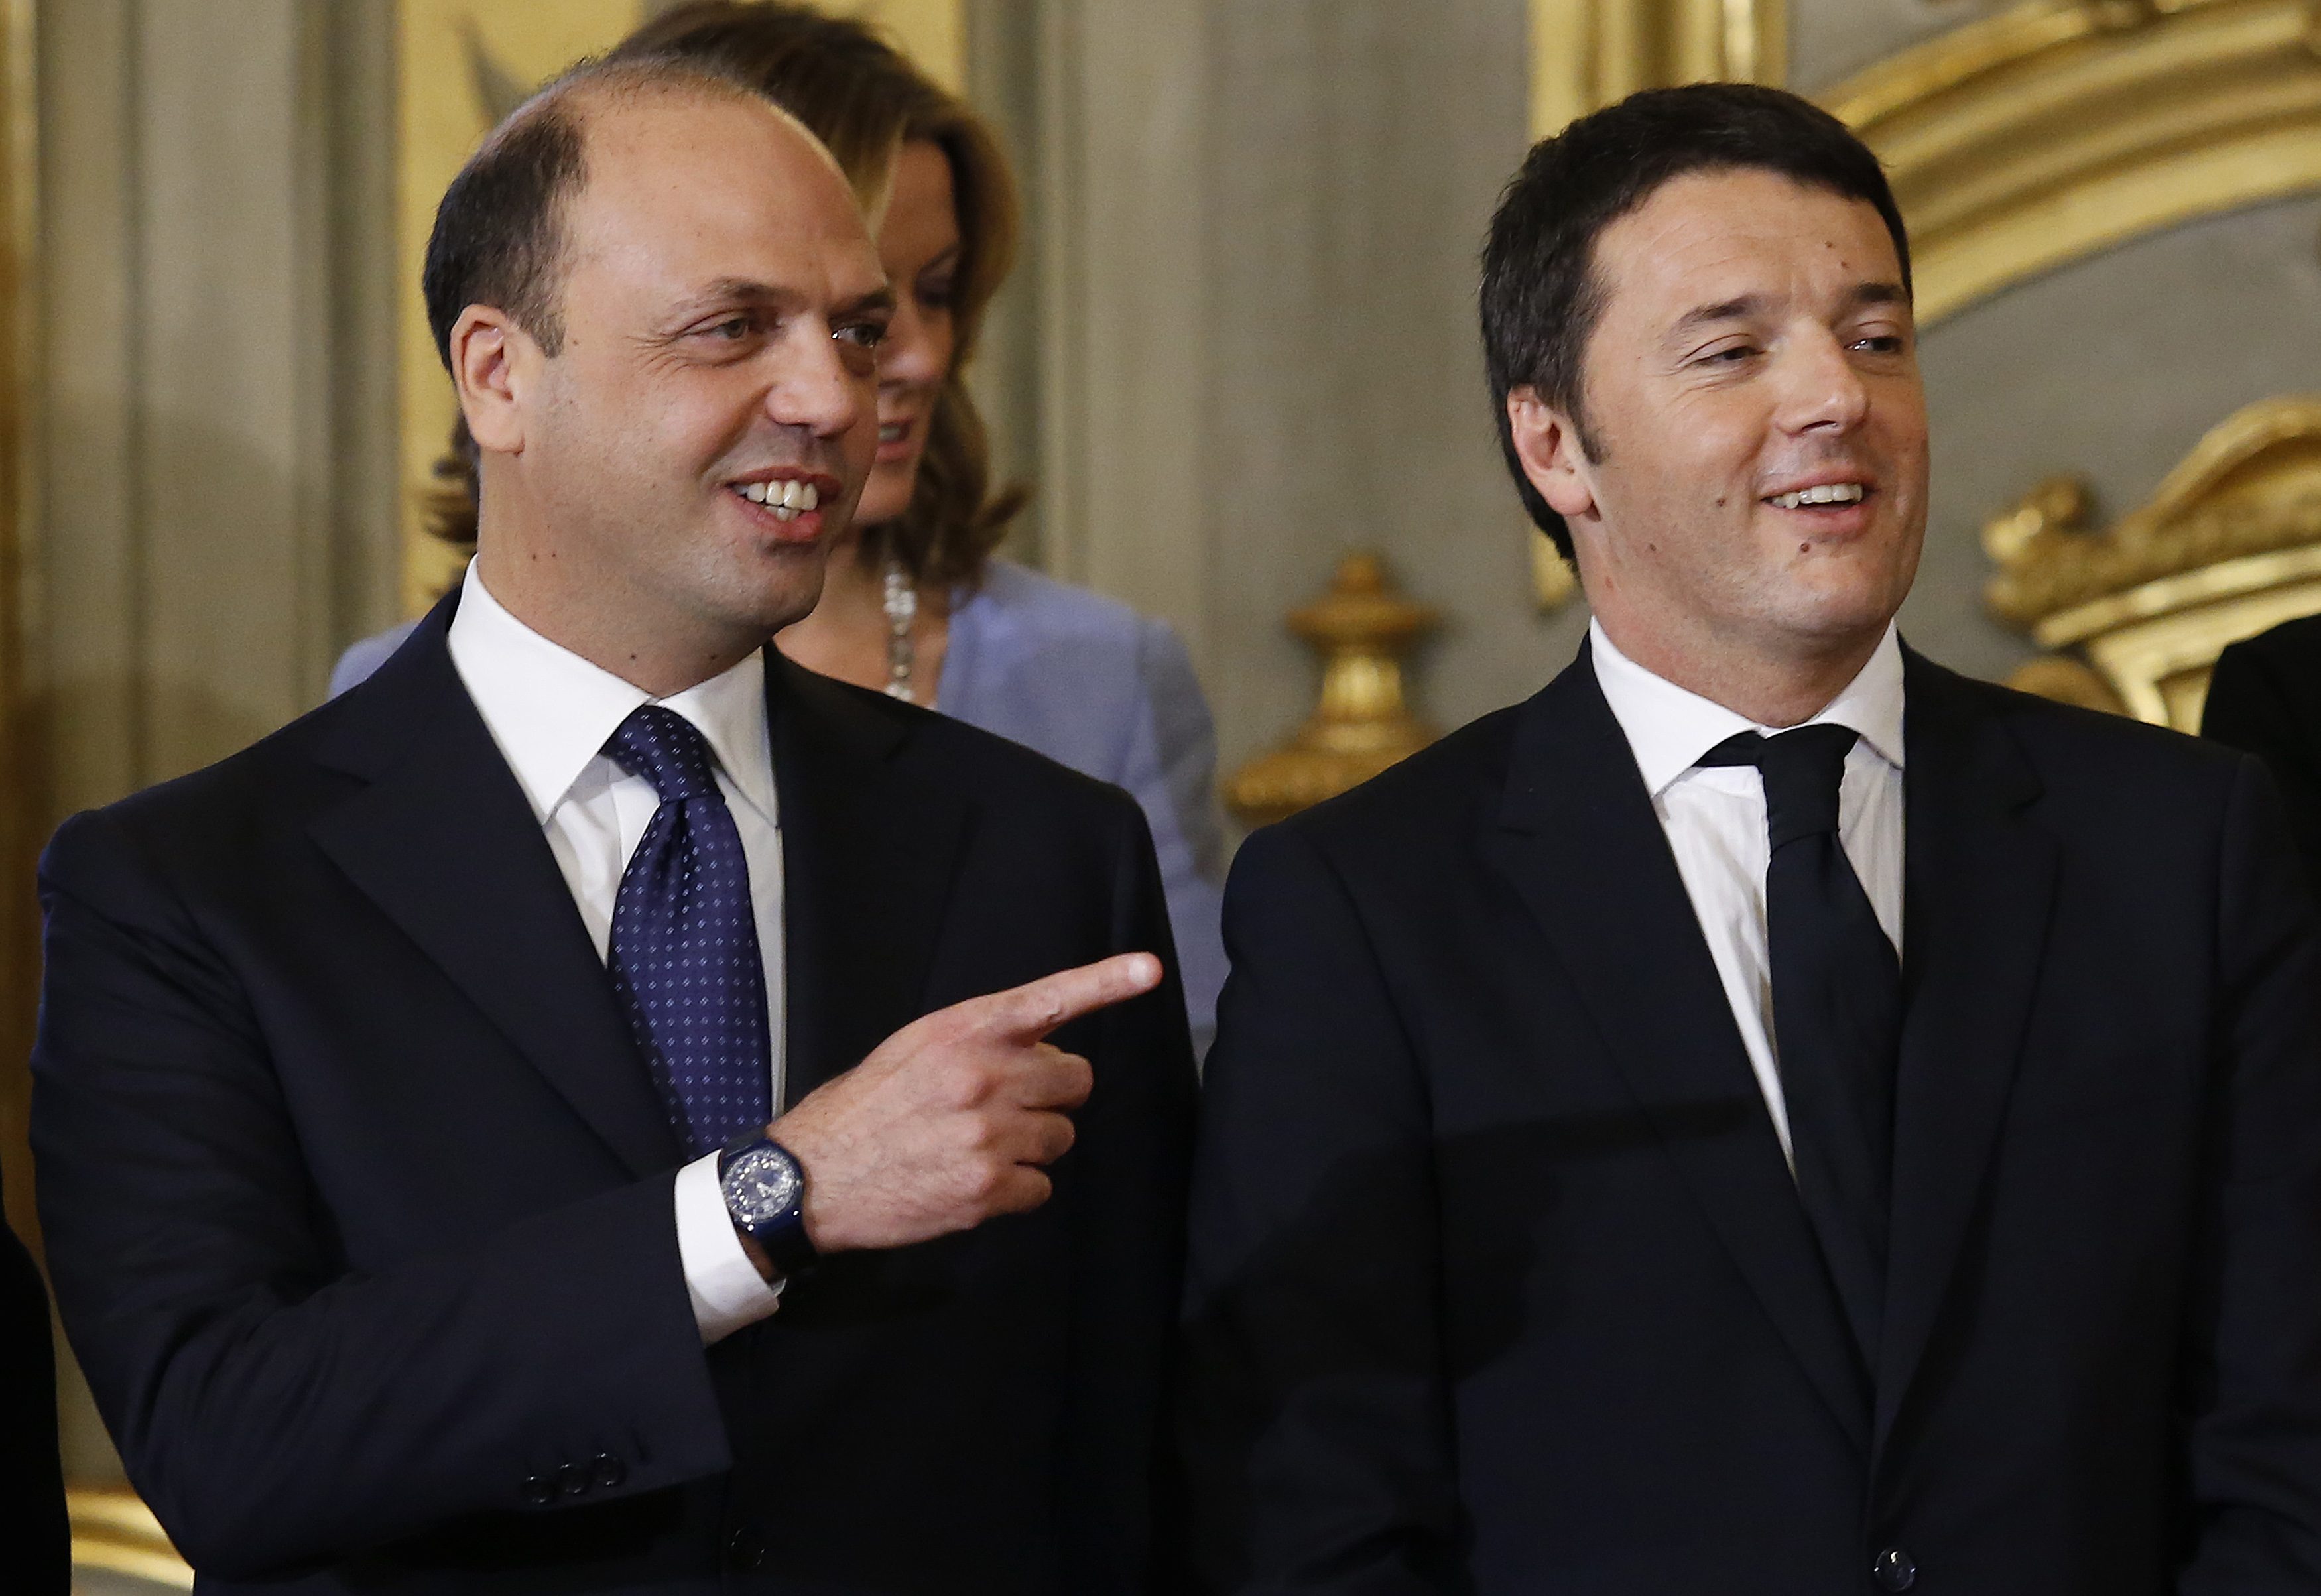 Newly appointed Italian Prime Minister Matteo Renzi (R) and Interior Minister Angelino Alfano talk during a swearing-in ceremony at Quirinale Palace in Rome February 22, 2014. Italian center-left leader Renzi promised on Friday to start work on reforms immediately, after he named a new cabinet and formally accepted the mandate to form an administration he said would stay in place until 2018. REUTERS/Remo Casilli  (ITALY - Tags: POLITICS)